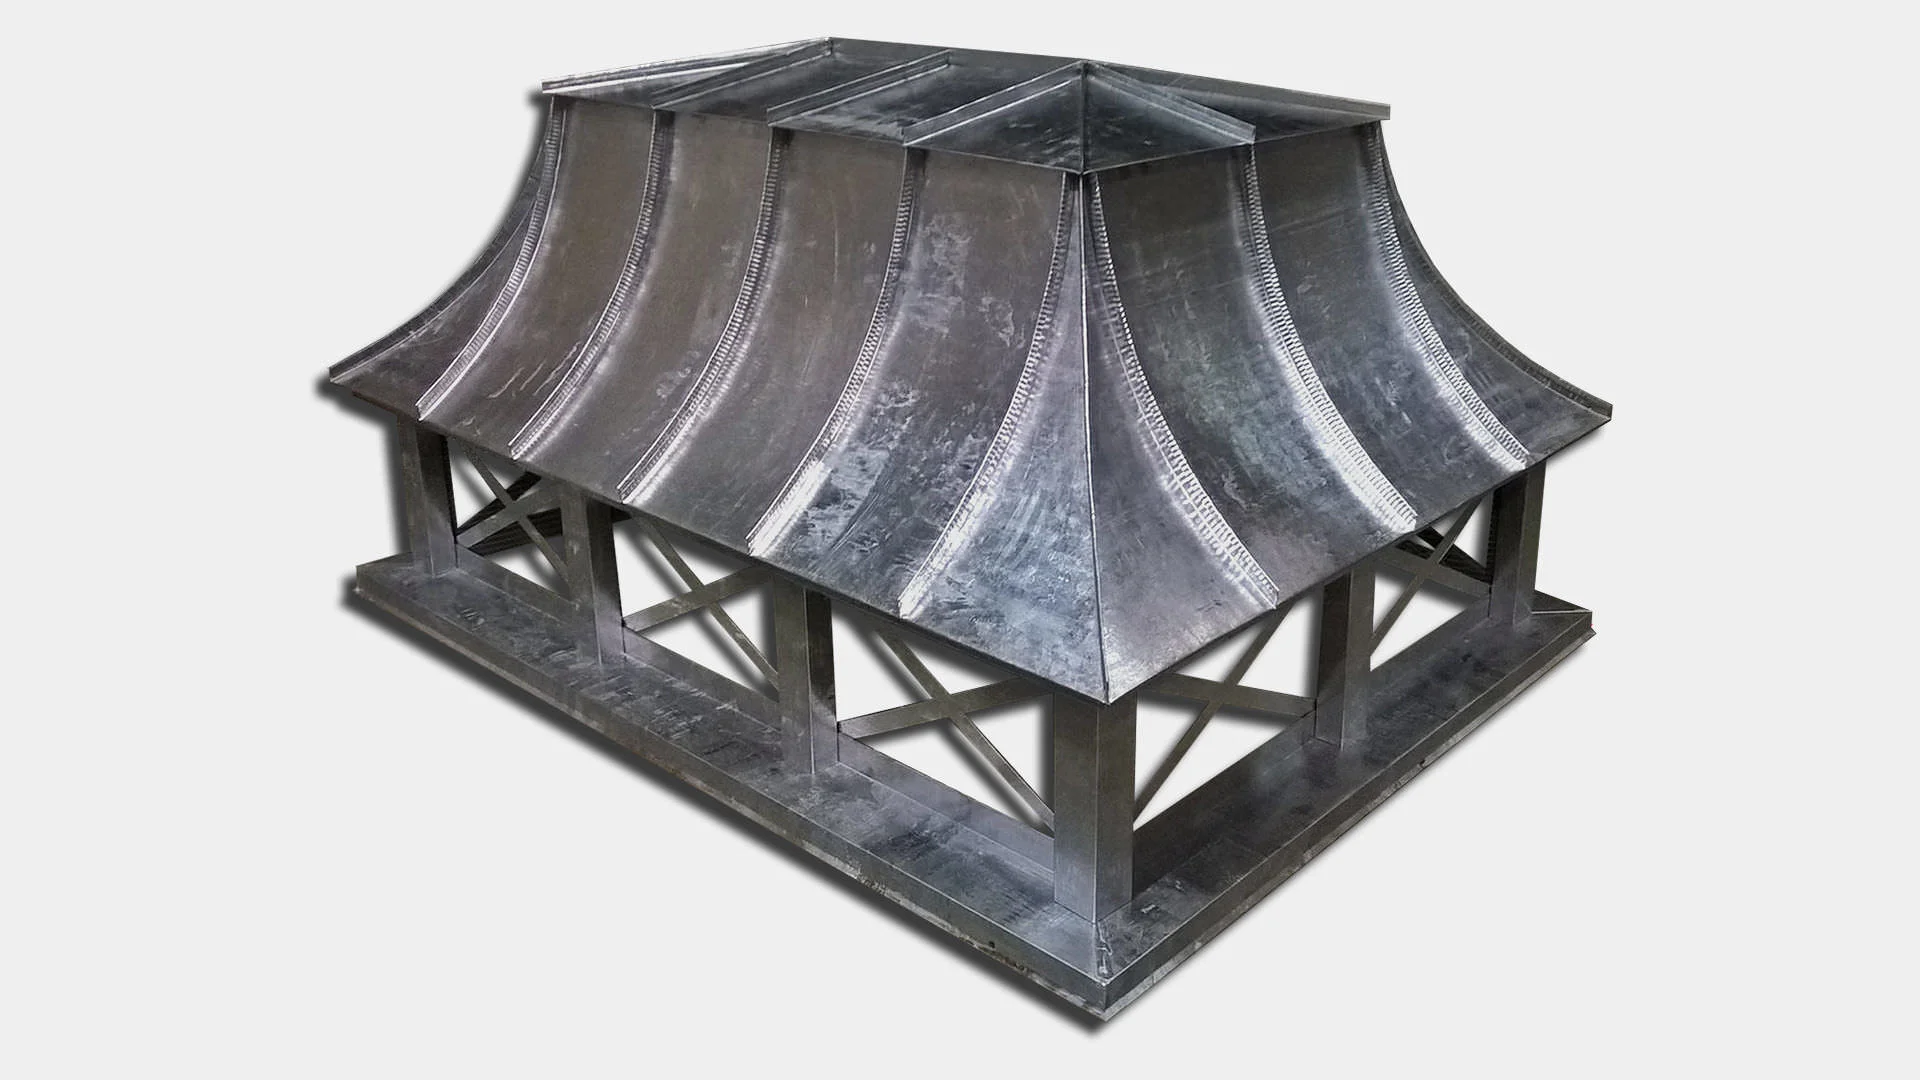 Lead coated copper chimney cap with concave metal roof panels